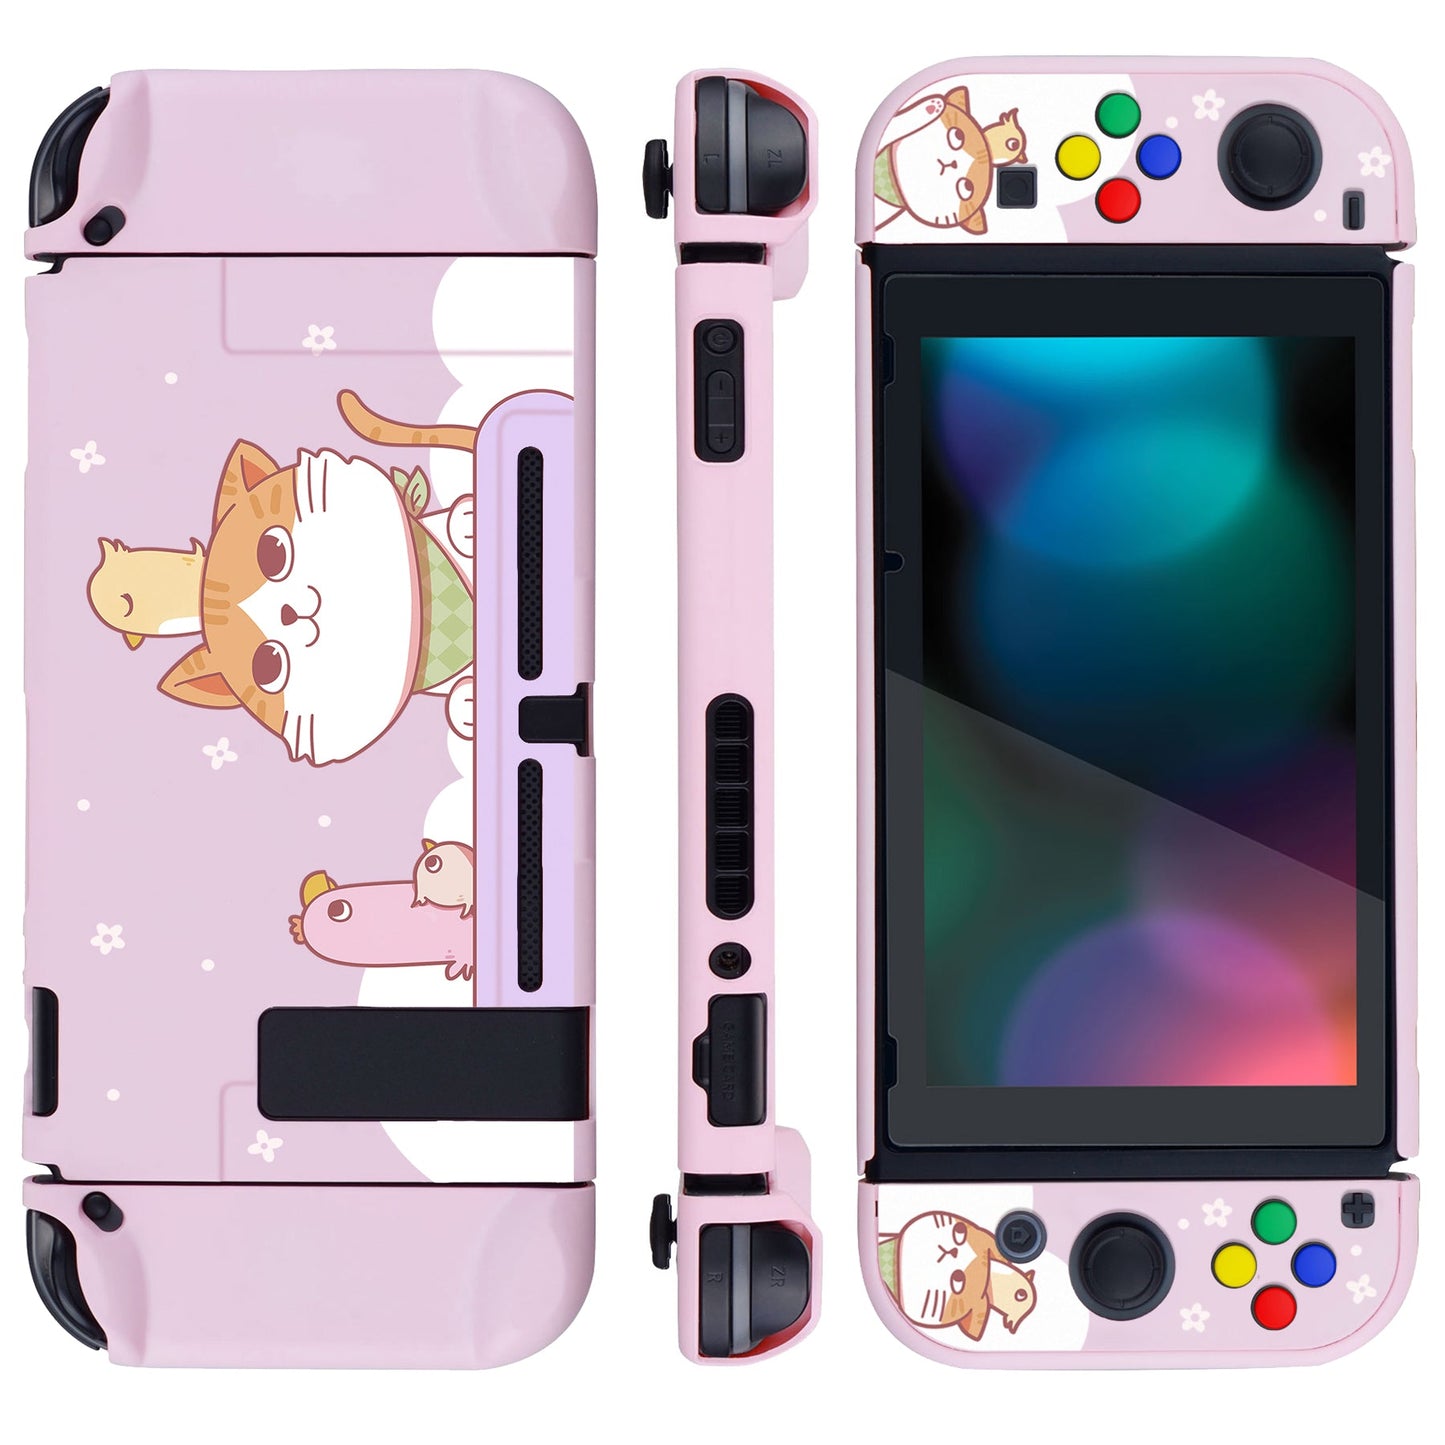 PlayVital Kitten & Chicken Back Cover for NS Switch Console, NS Joycon Handheld Controller Separable Protector Hard Shell, Dockable Protective Case with Colorful ABXY Direction Button Caps - NTT109 PlayVital